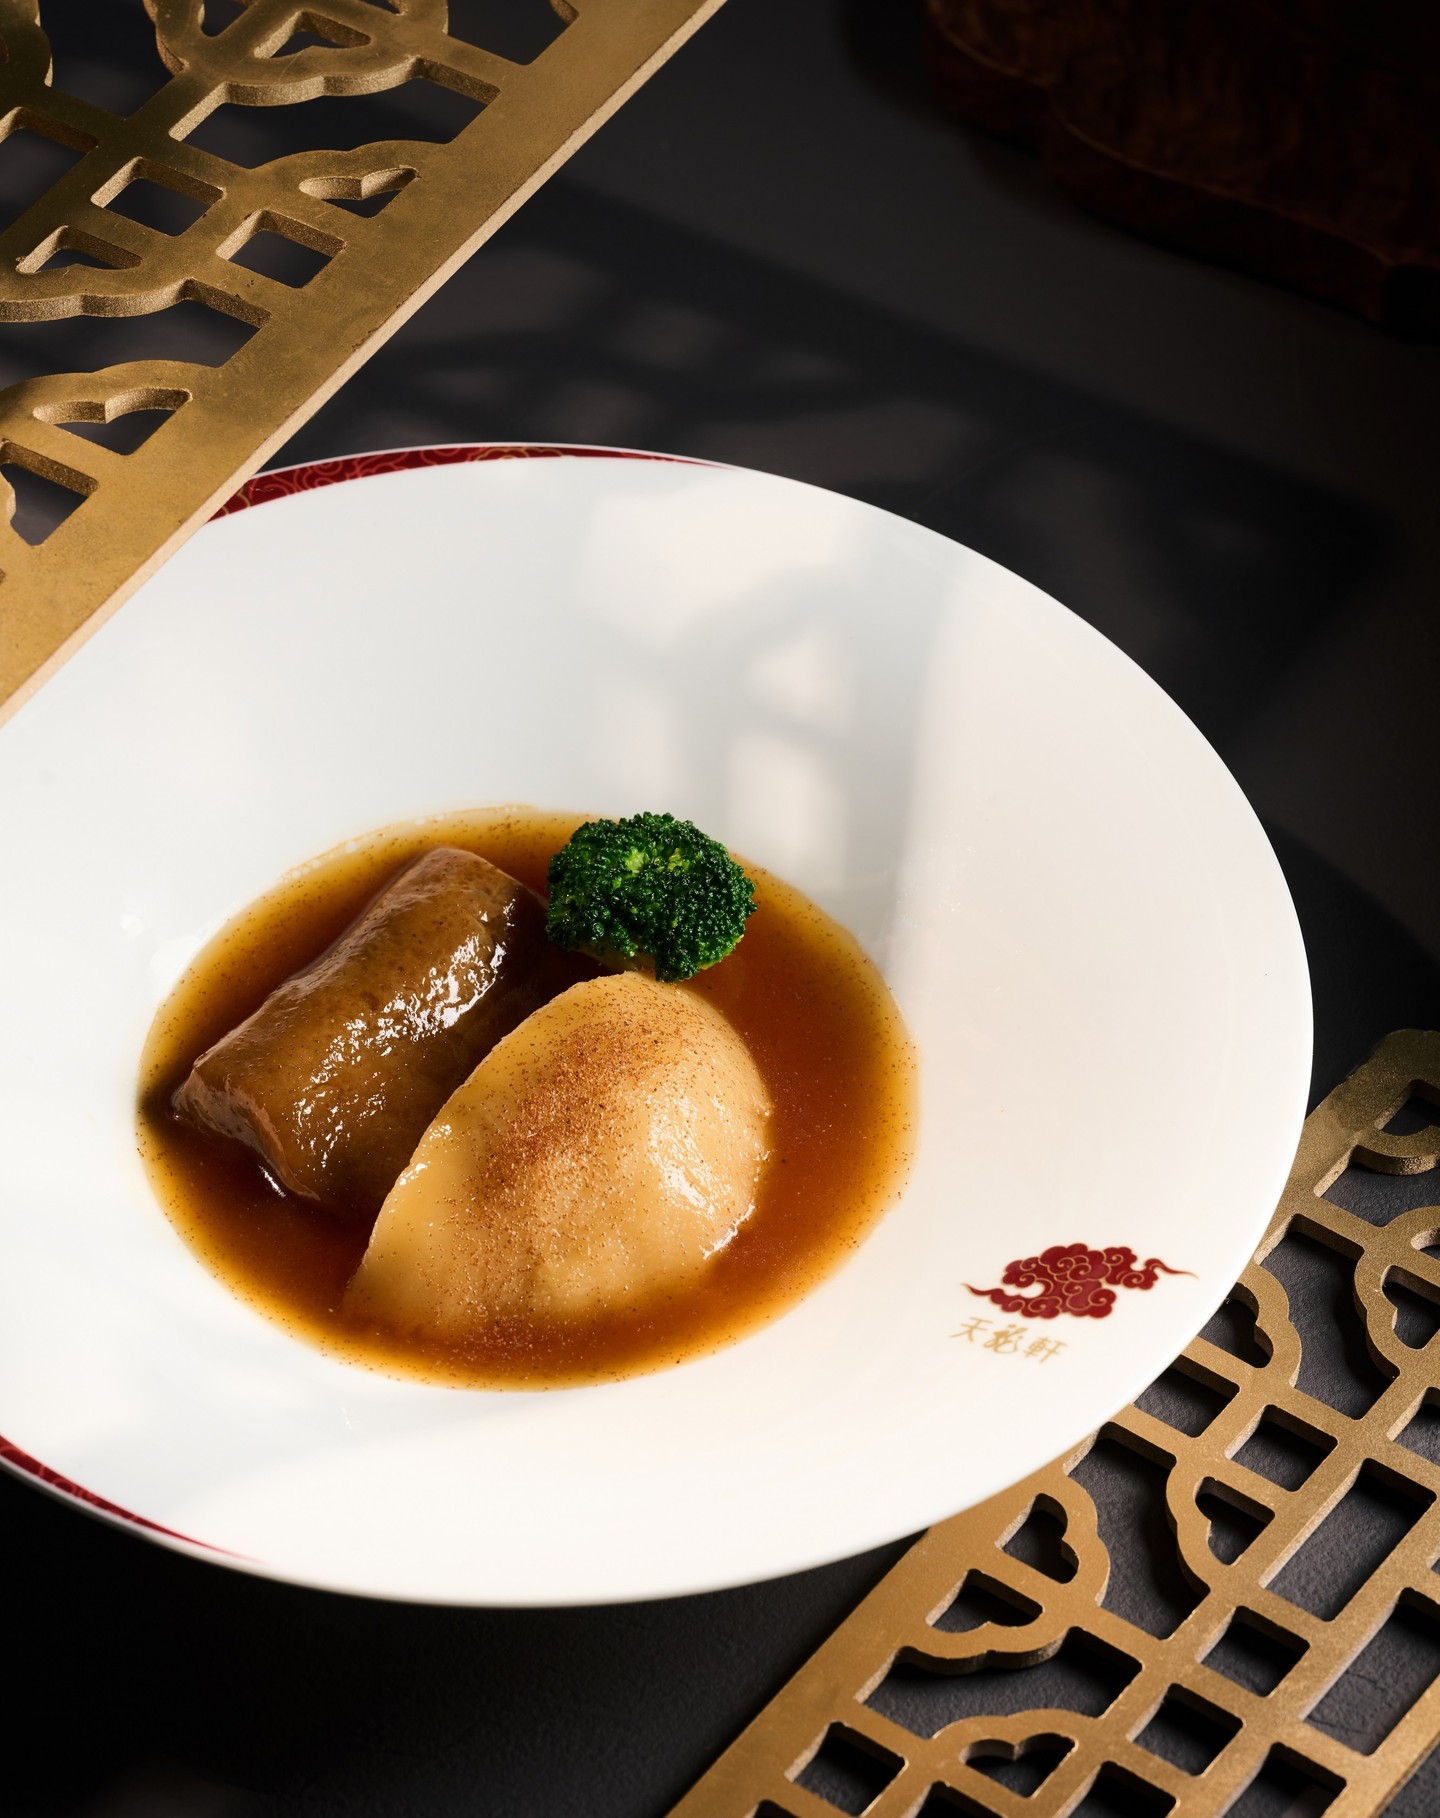 Braised Sea Cucumber with Pomelo Peel and Dried Shrimp Roe in Supreme Sauce.